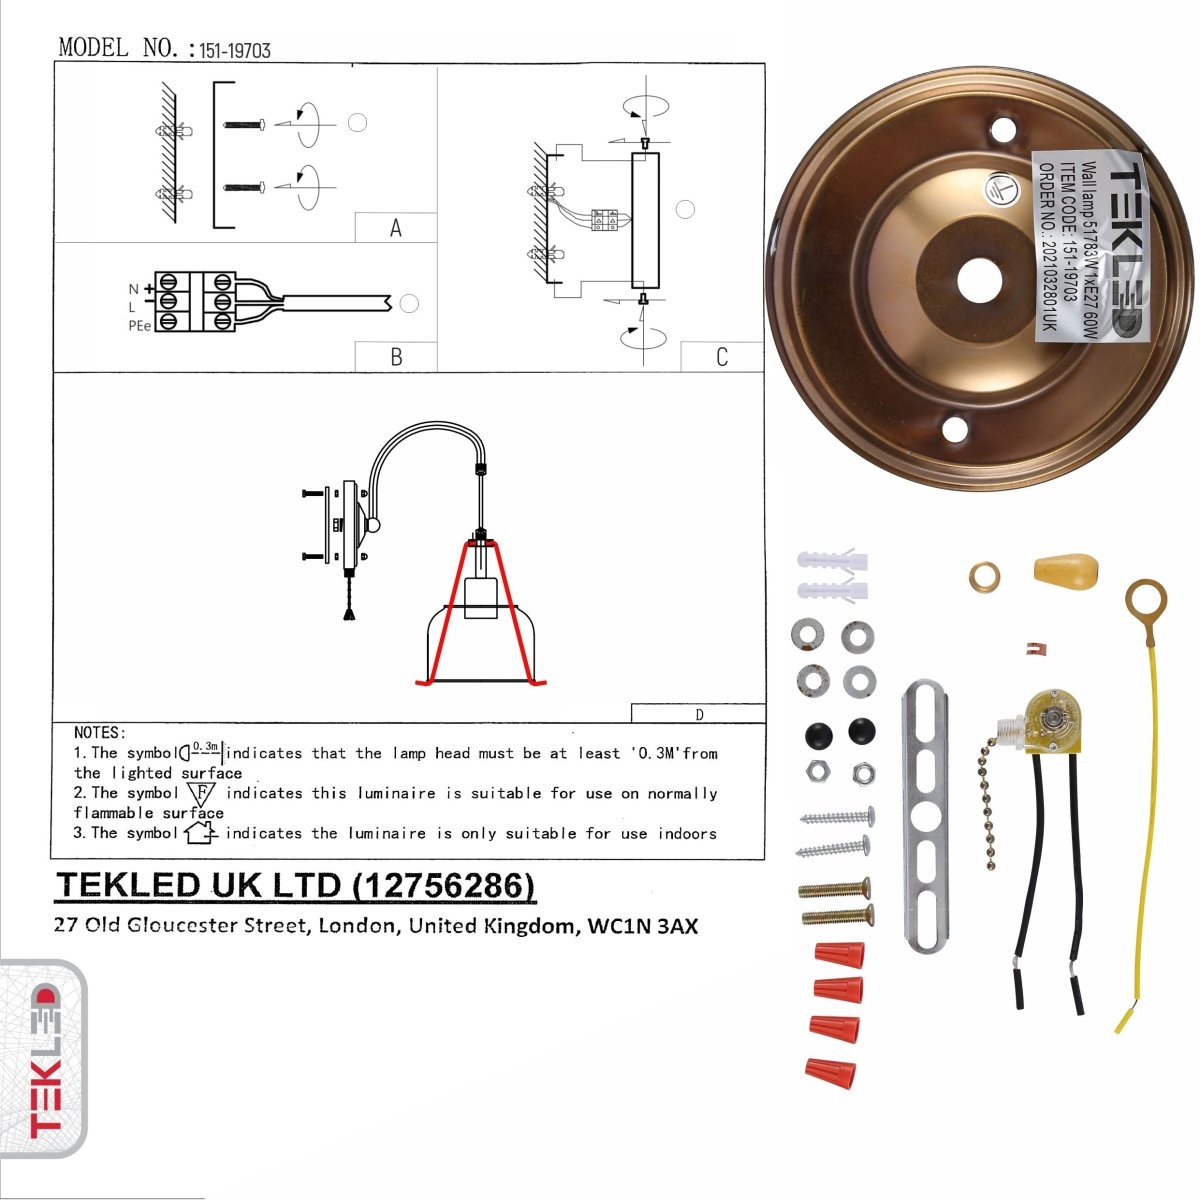 User manual and box content of amber glass pendant wall light e27 and pull down switch